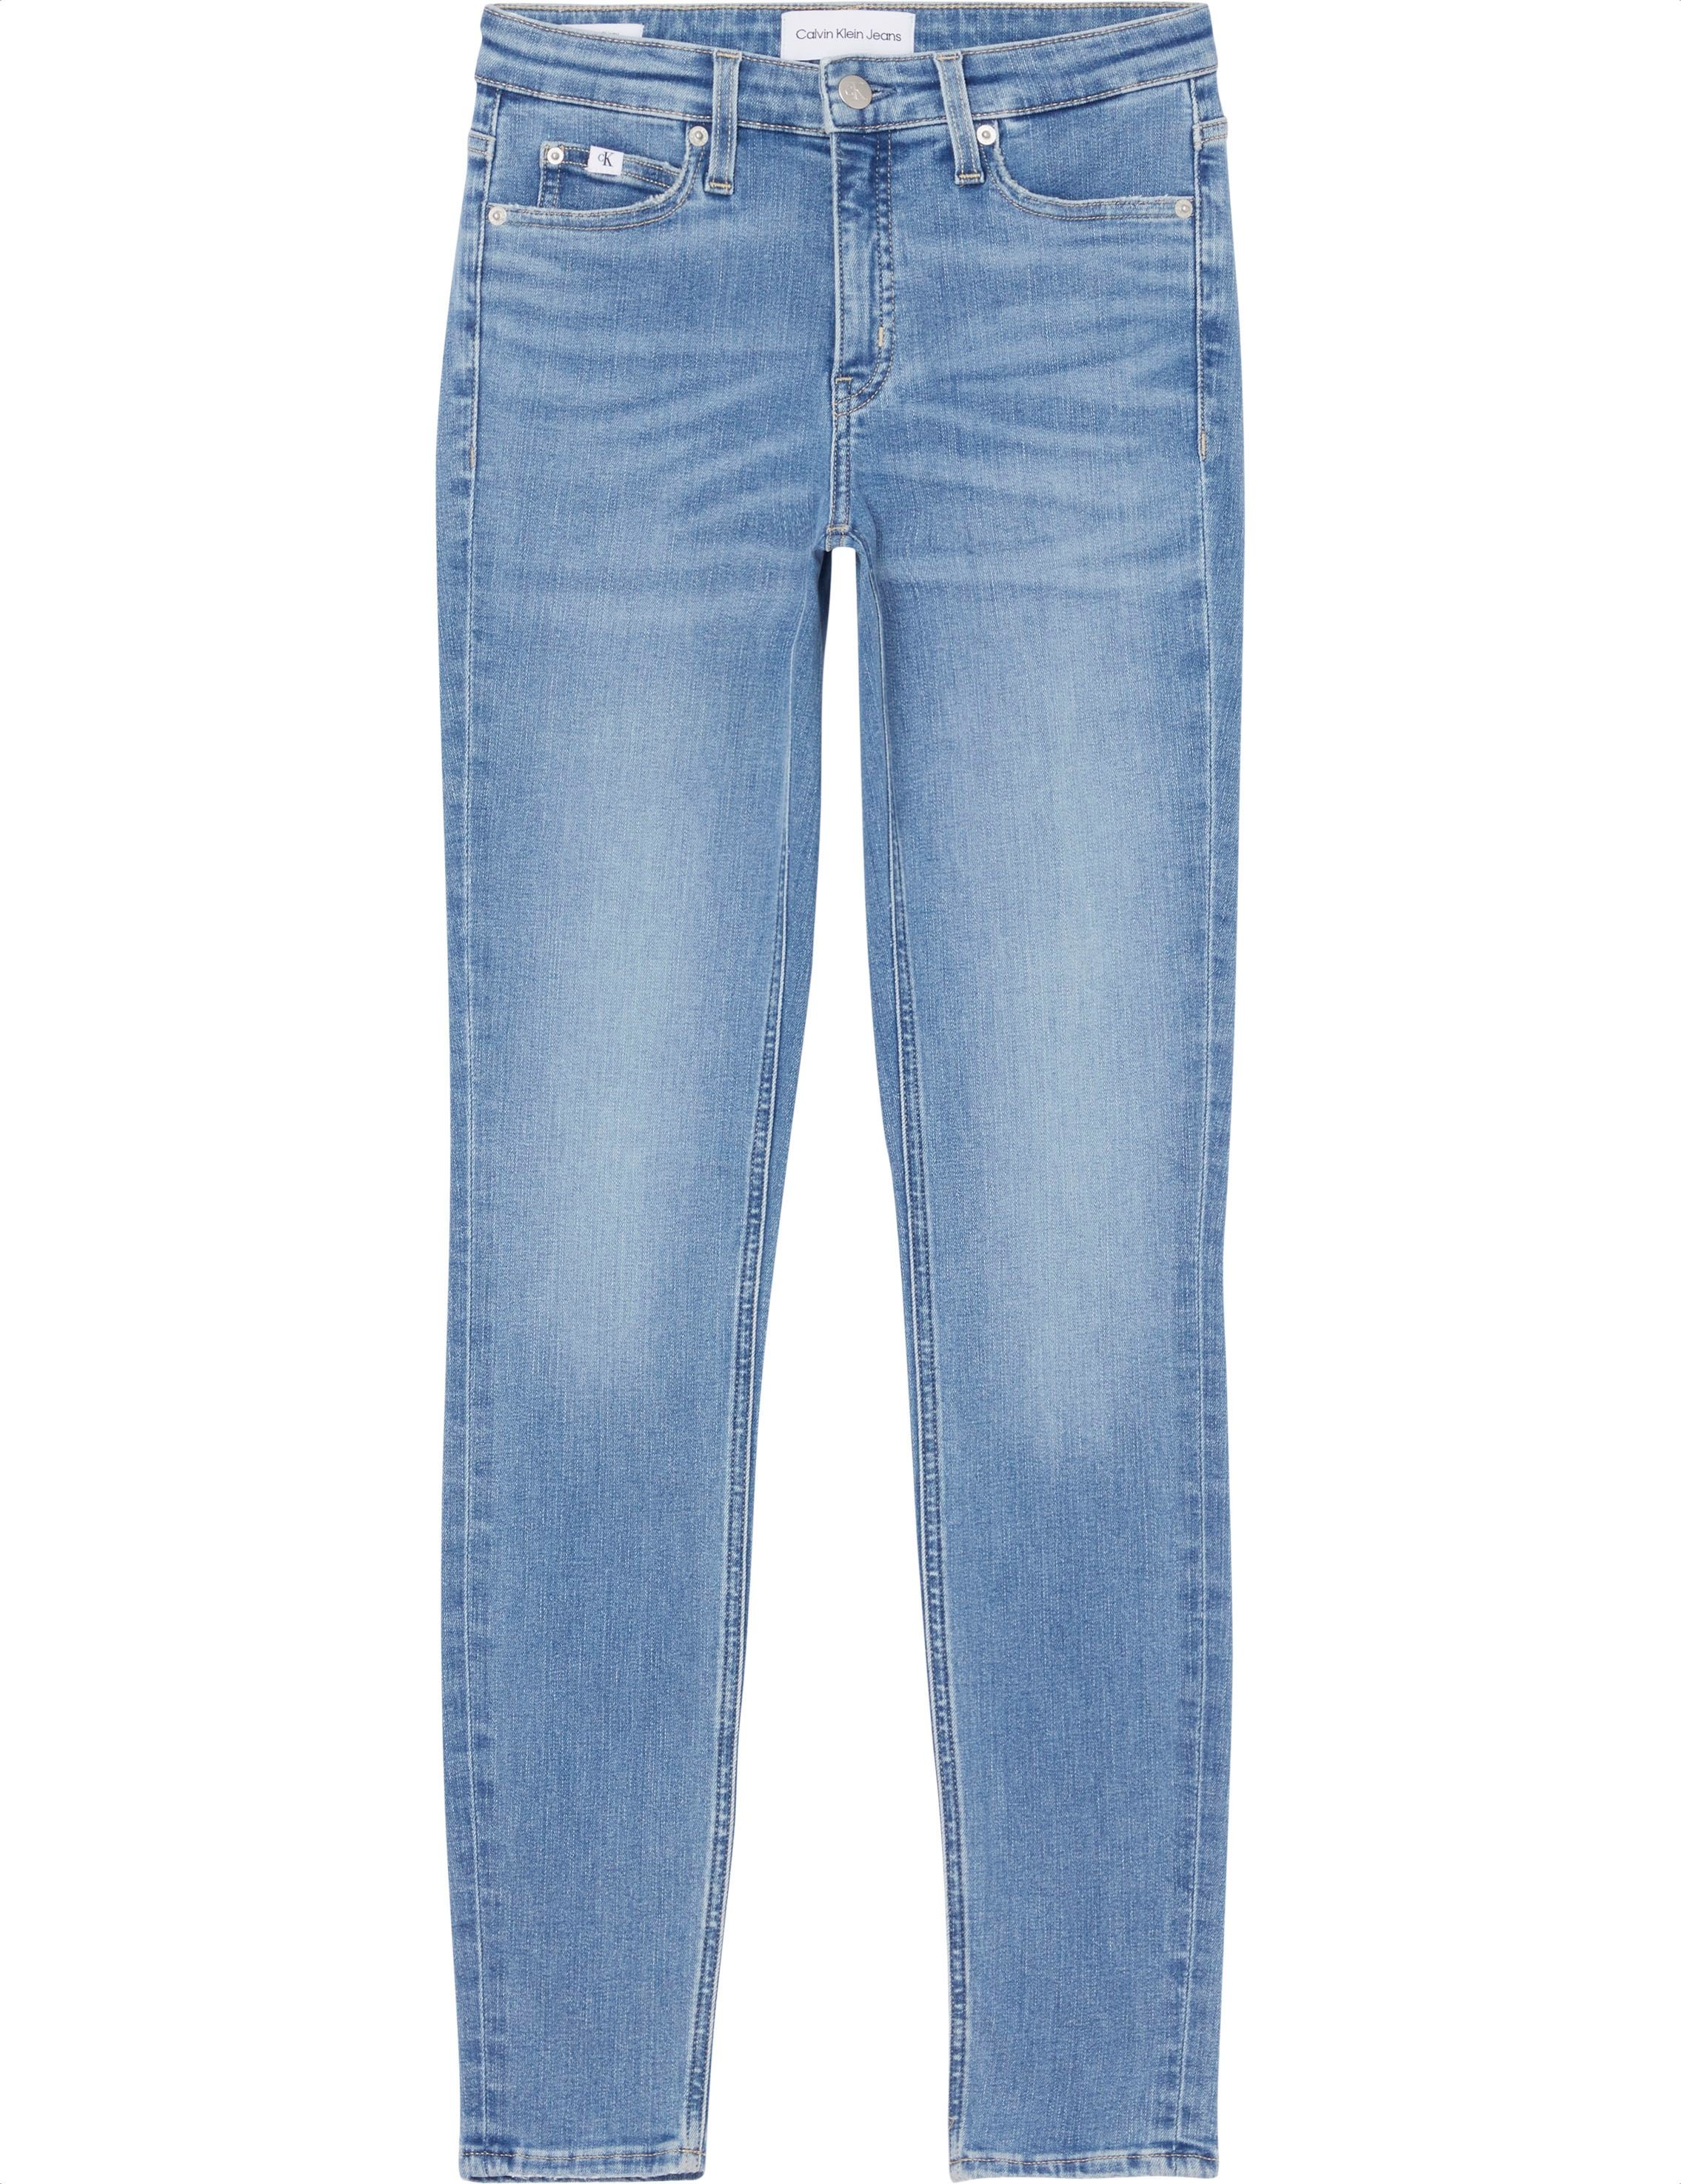 Calvin Klein Jeans online OTTO Skinny-fit-Jeans, bei im 5-Pocket-Style